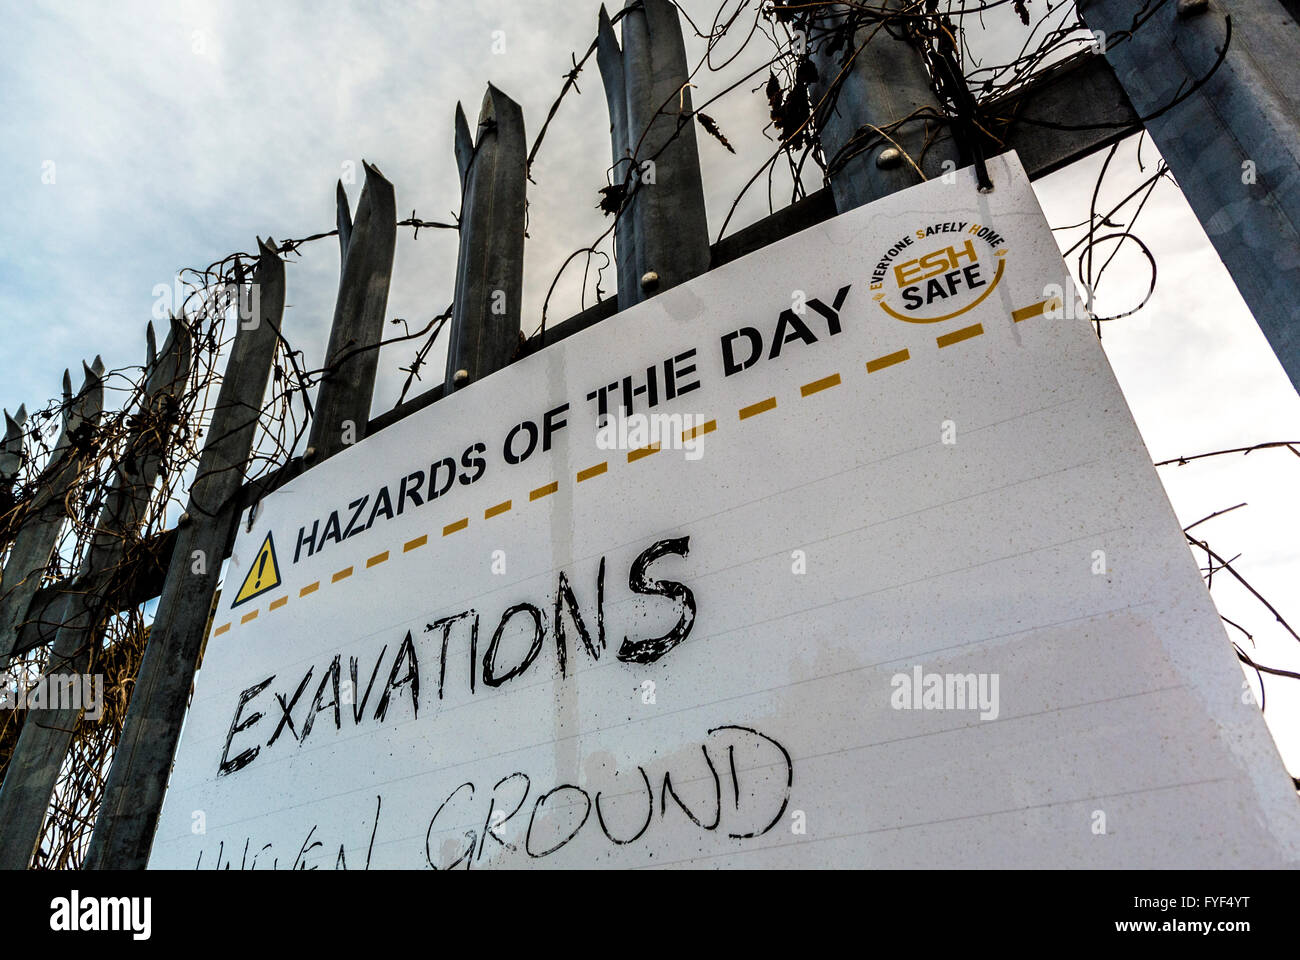 Hazards of the day sign on building site with misspelled word Exavations (Excavations) Stock Photo